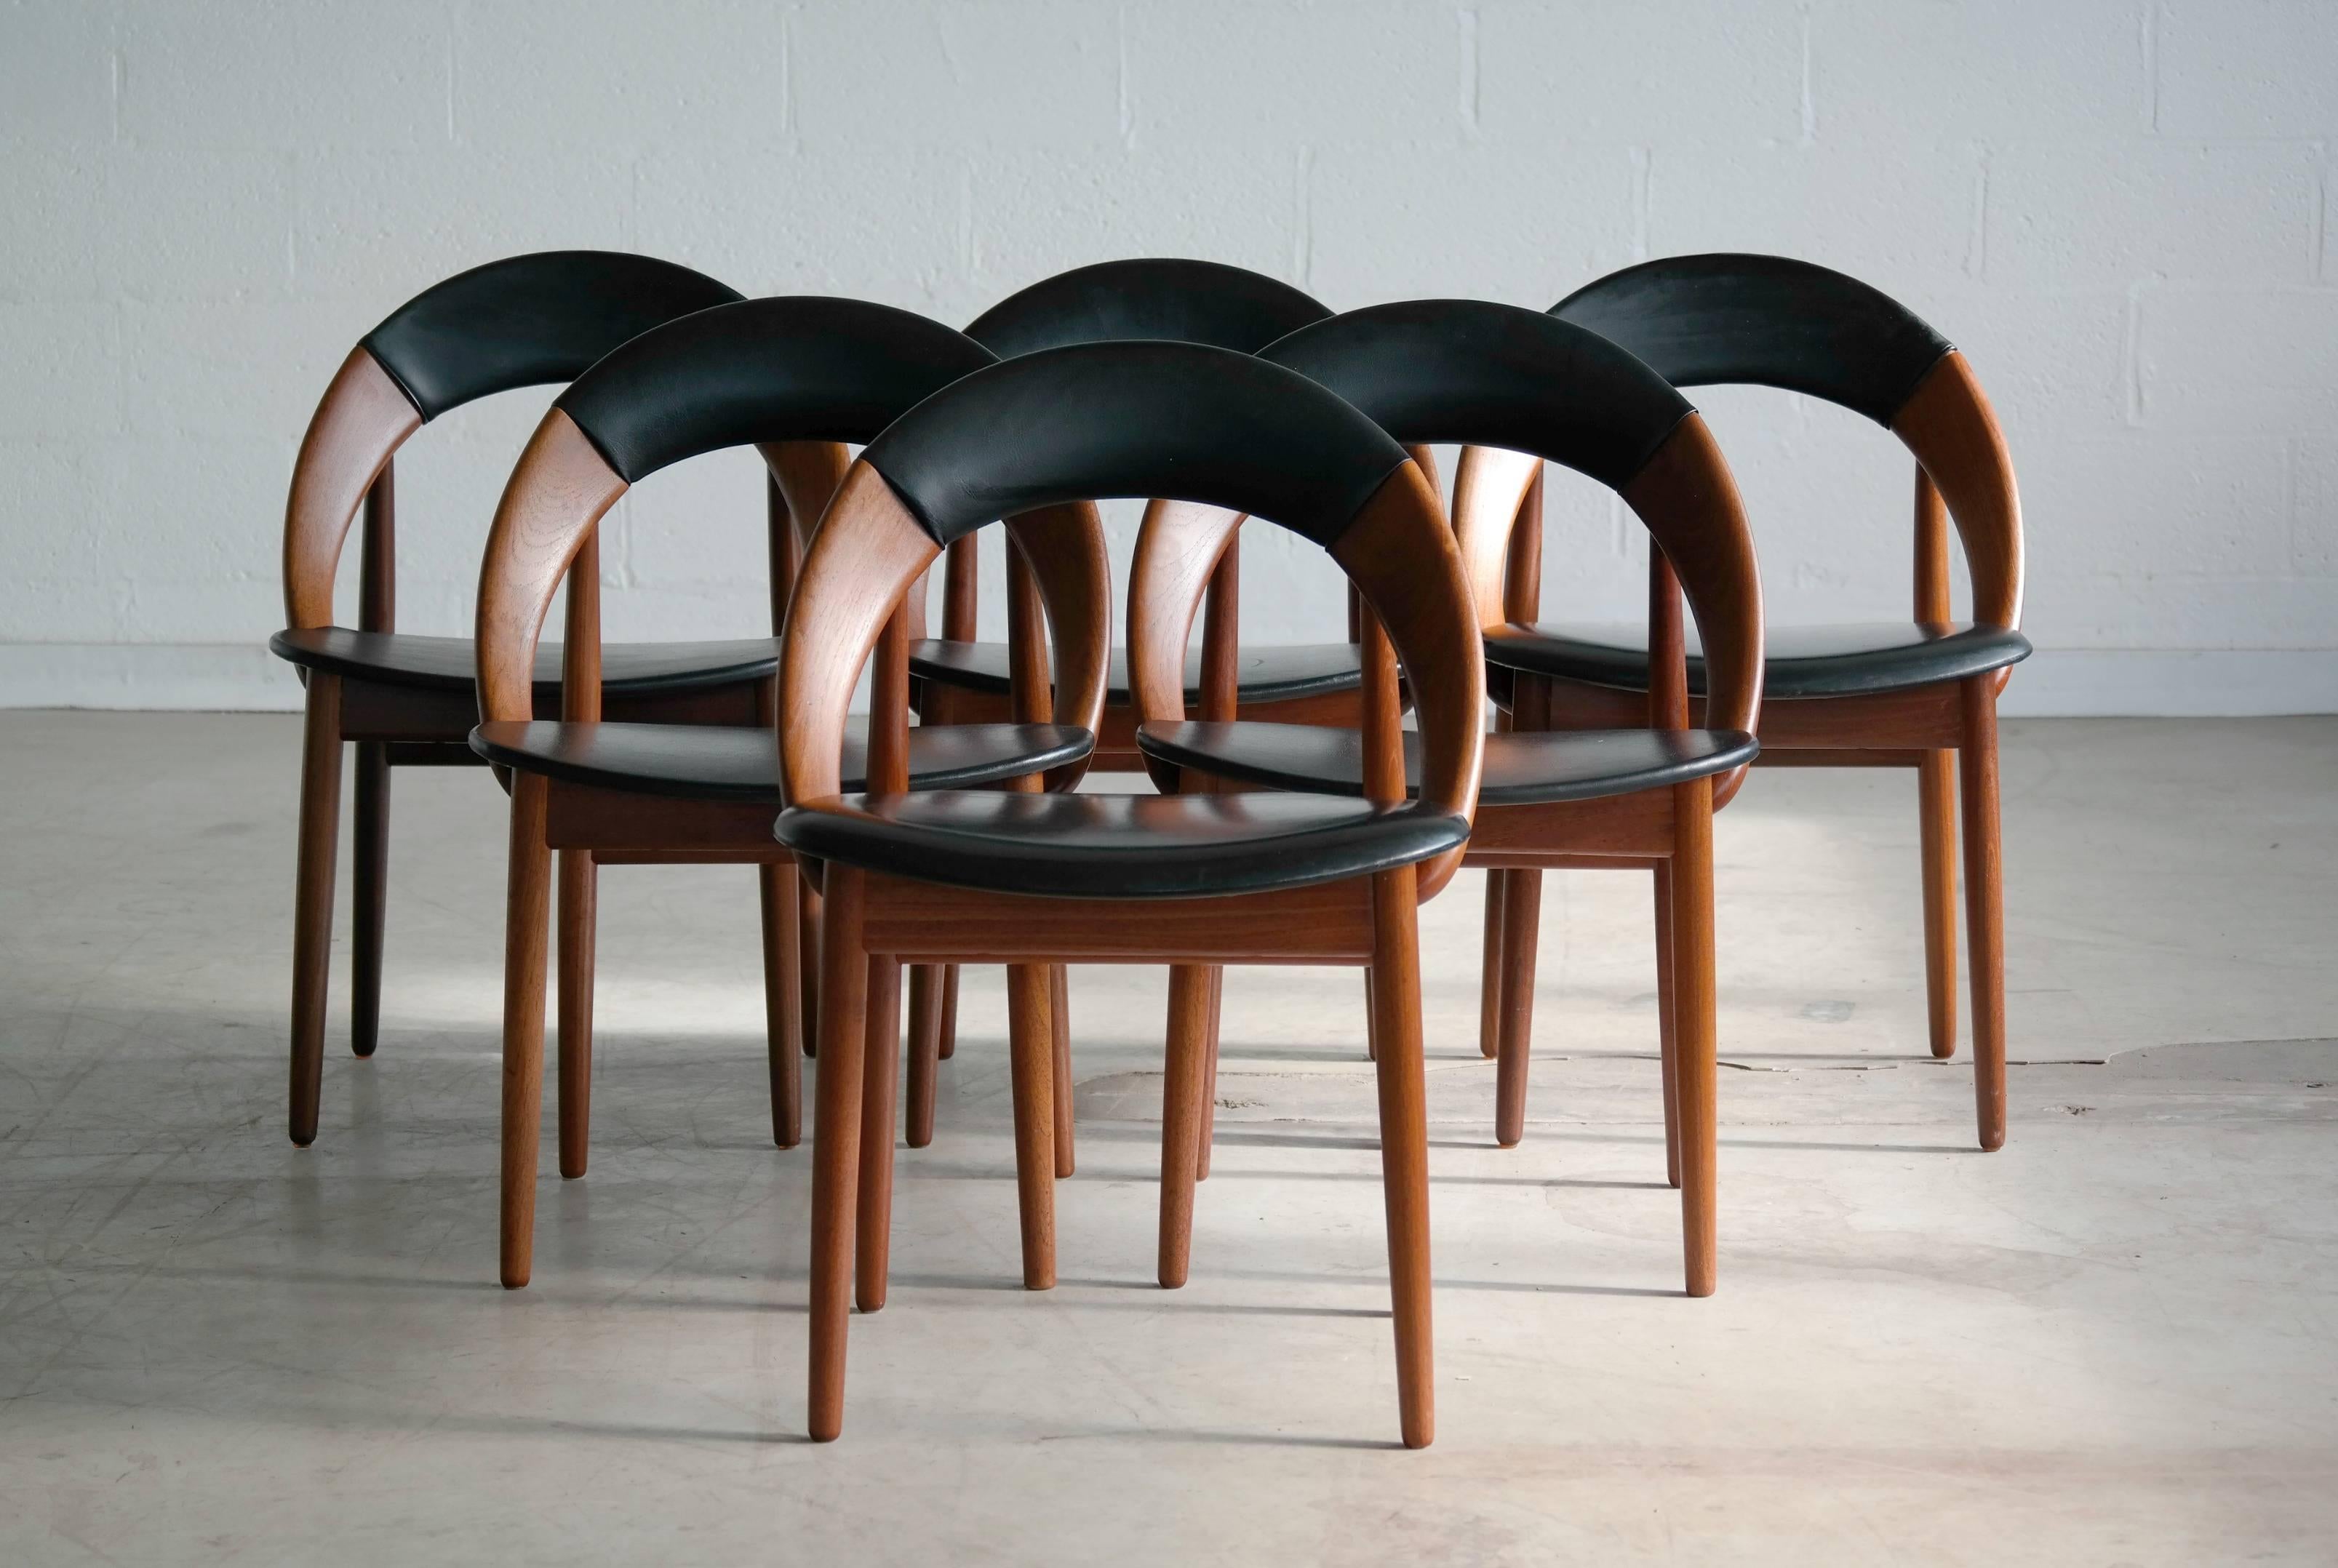 This is a very hard to find set of six iconic dining chairs designed by Arne Hovmand-Olsen. This highly coveted design is often found as a single chair or even in pairs but rarely in full sets. This is the only set offered on 1stdibs currently. The